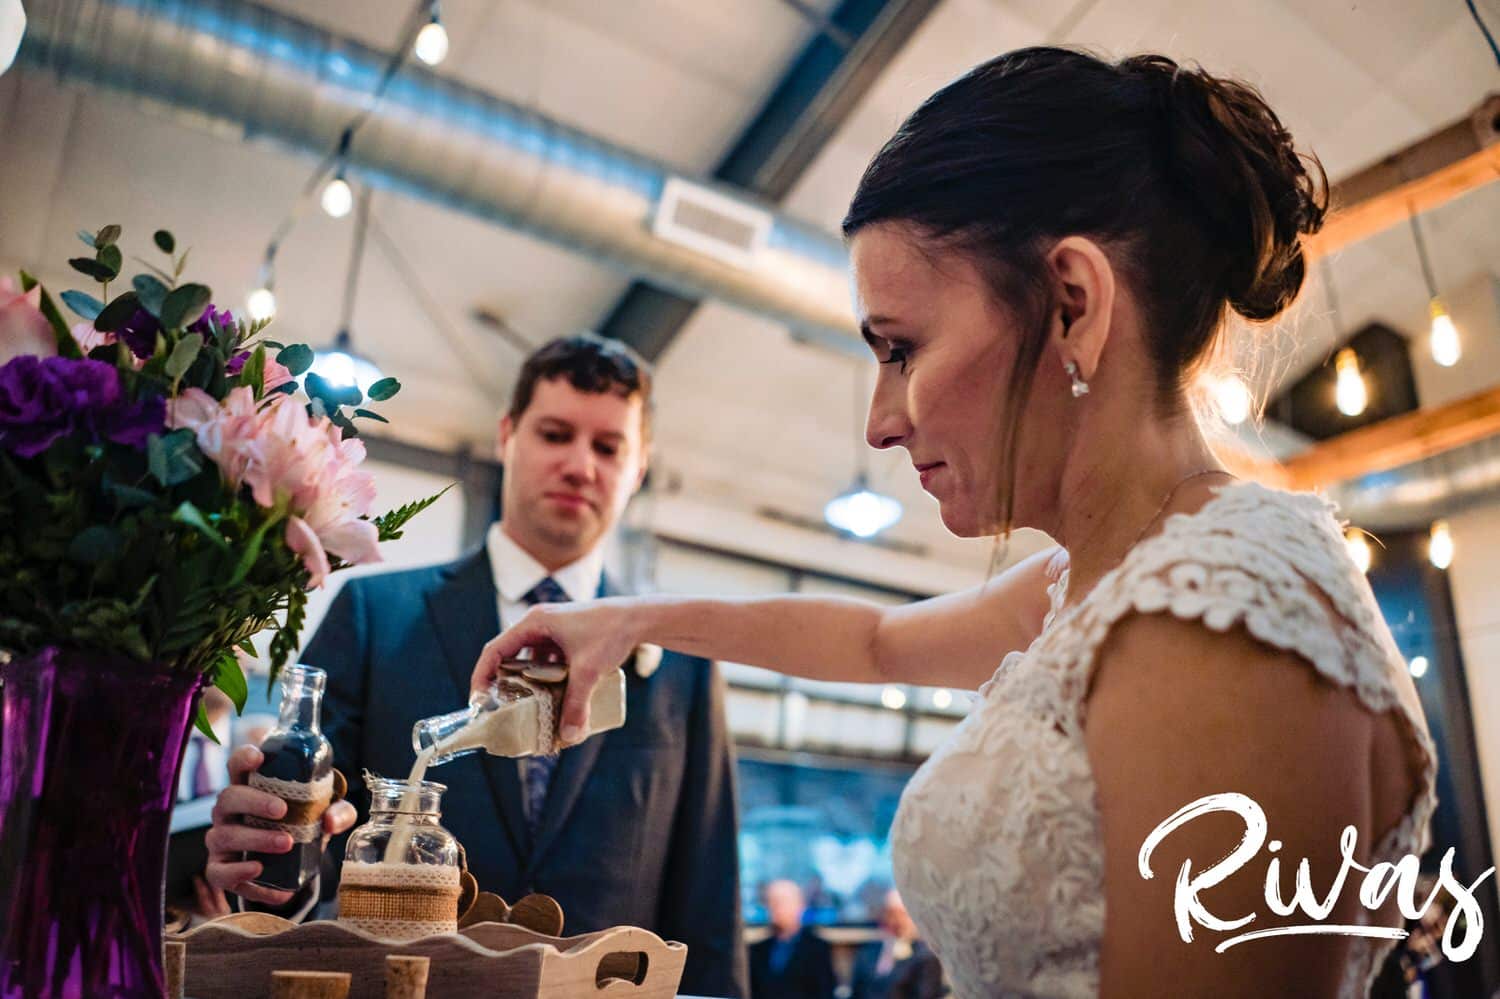 A candid picture of a bride and groom pouring sand into a vase during their unity ceremony at The Bowery. 